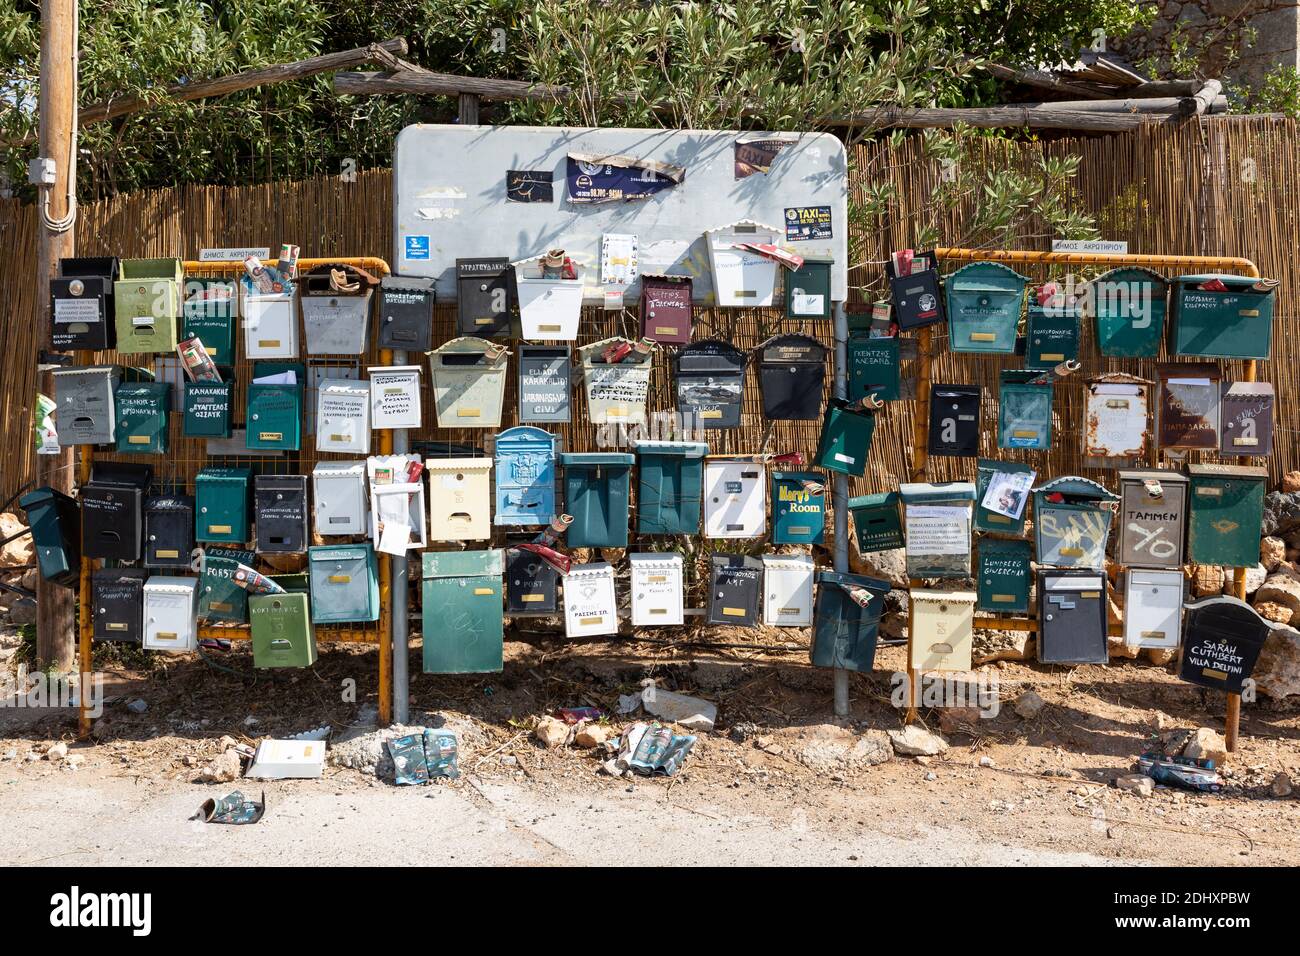 A multitude of letterboxes in Crete, Greece Stock Photo